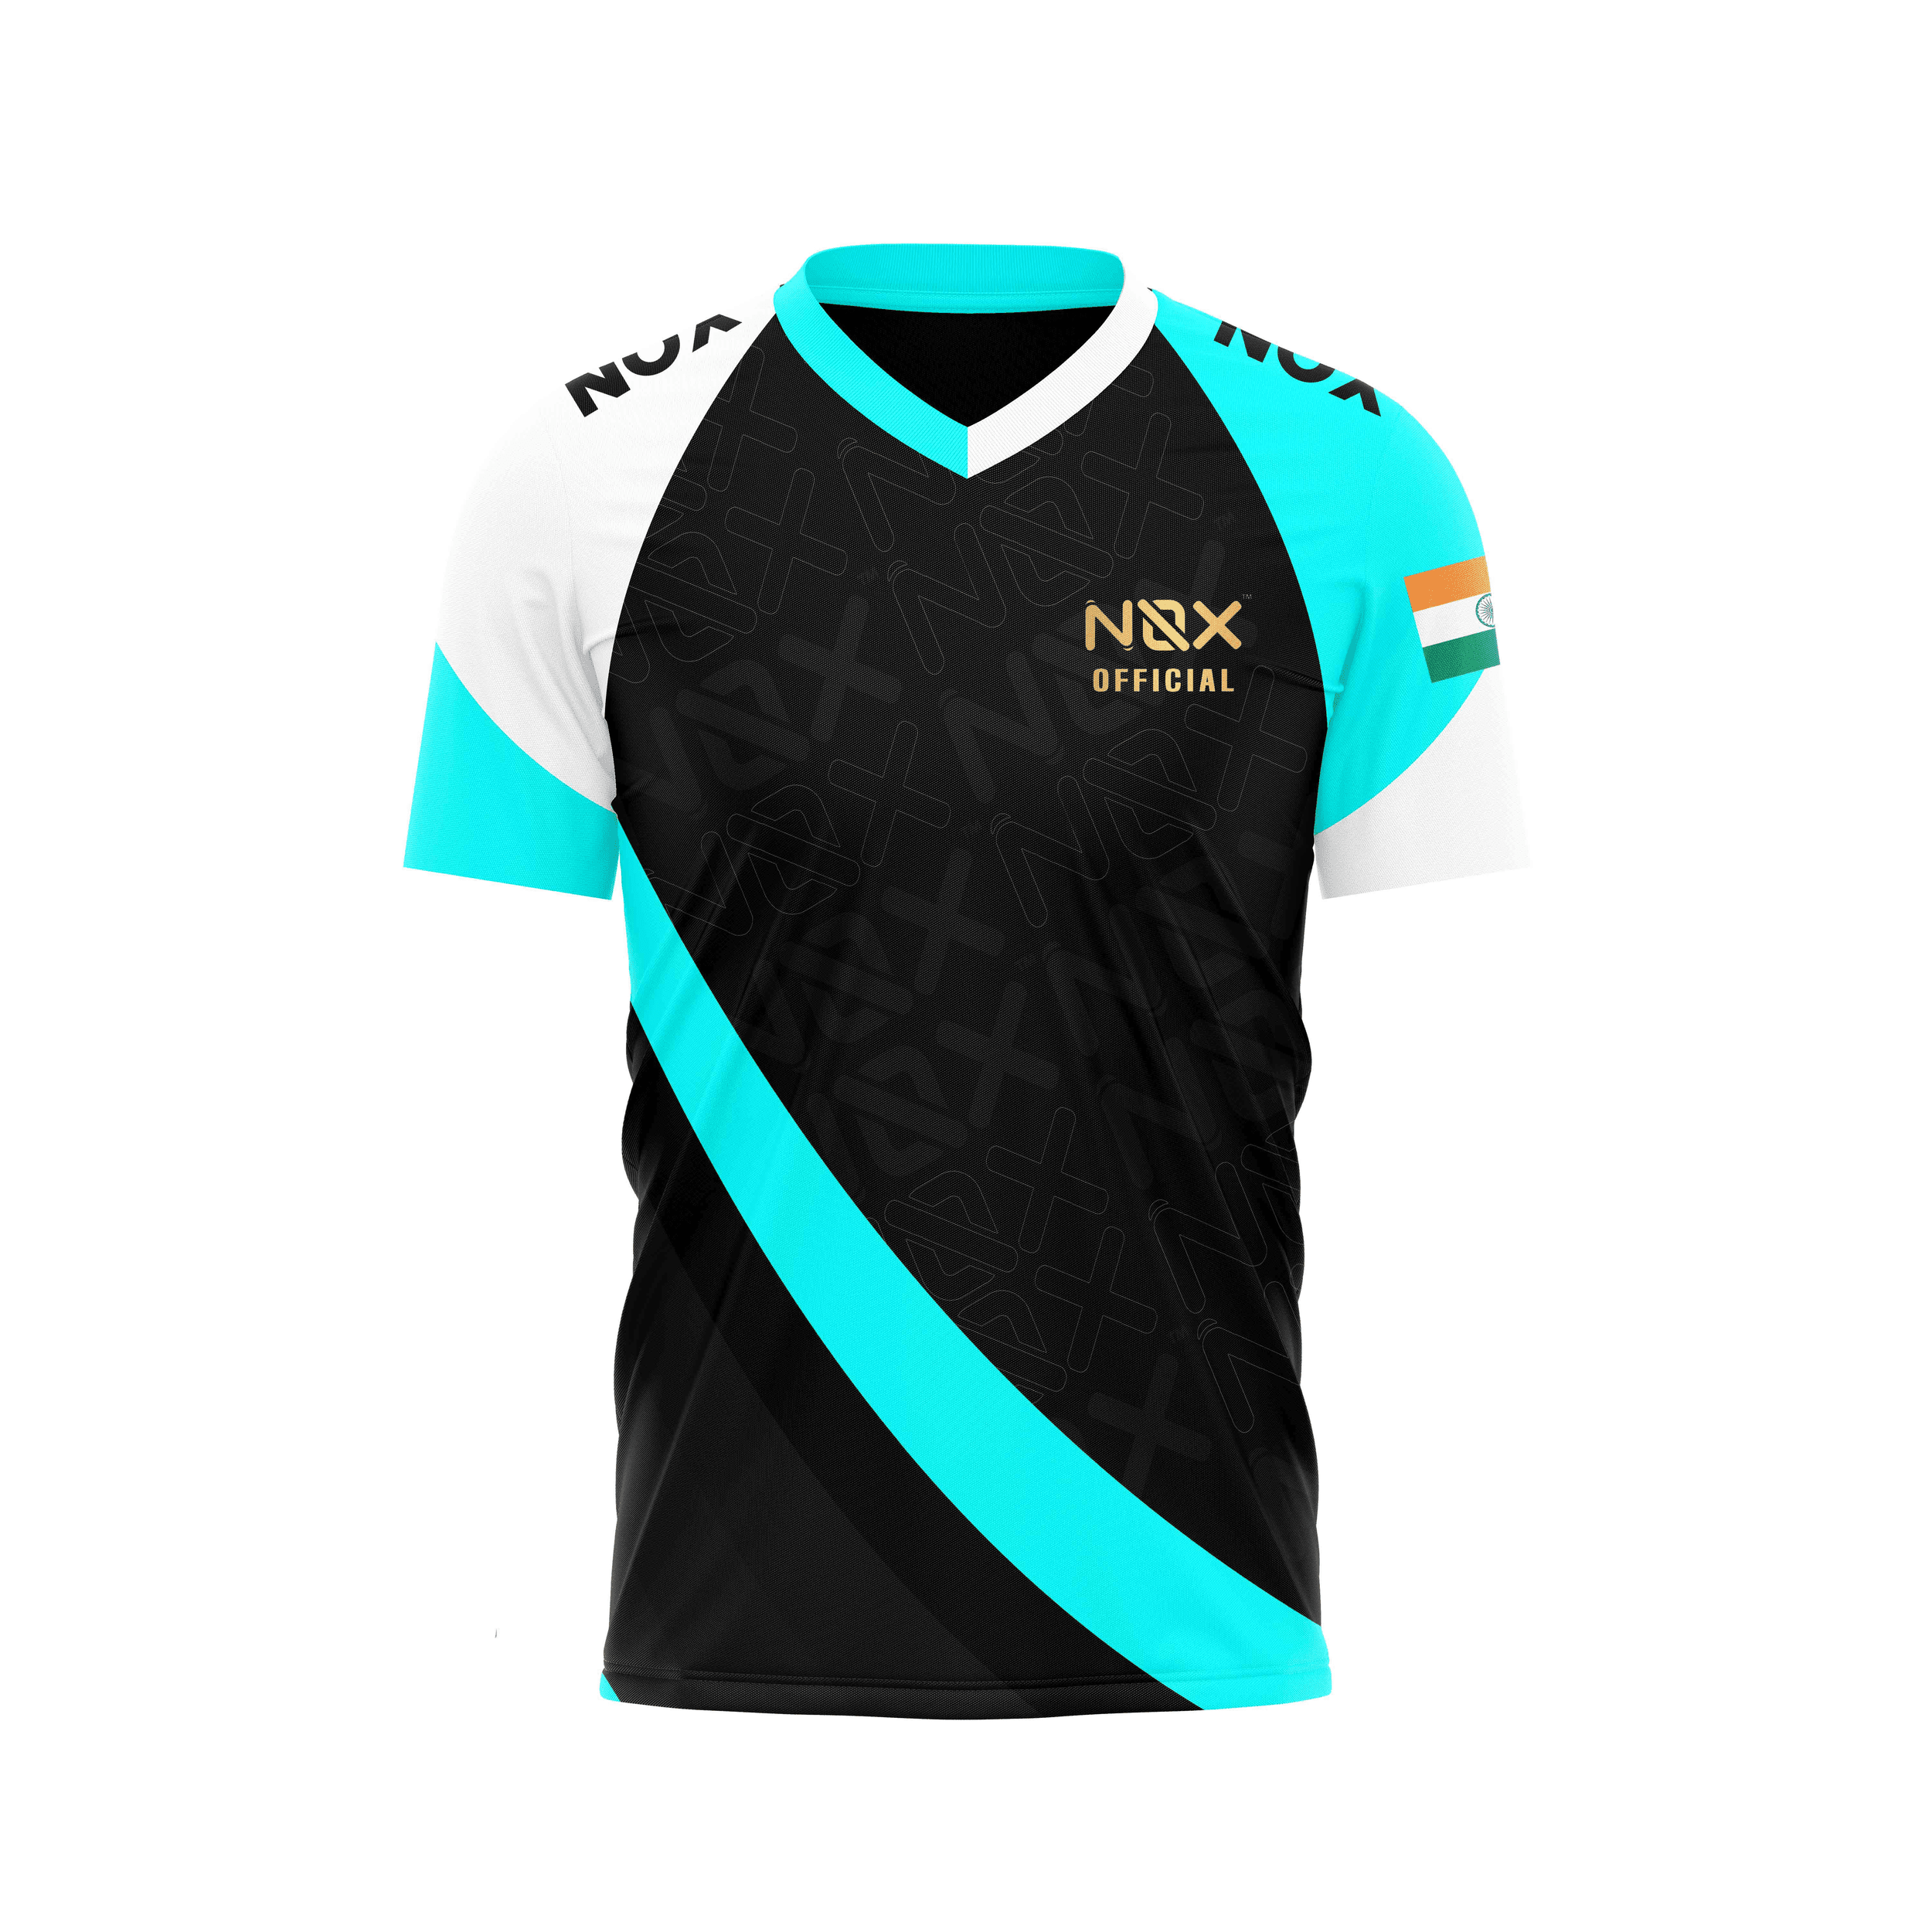 NOX Personalized Esports Jersey Design Free-Front